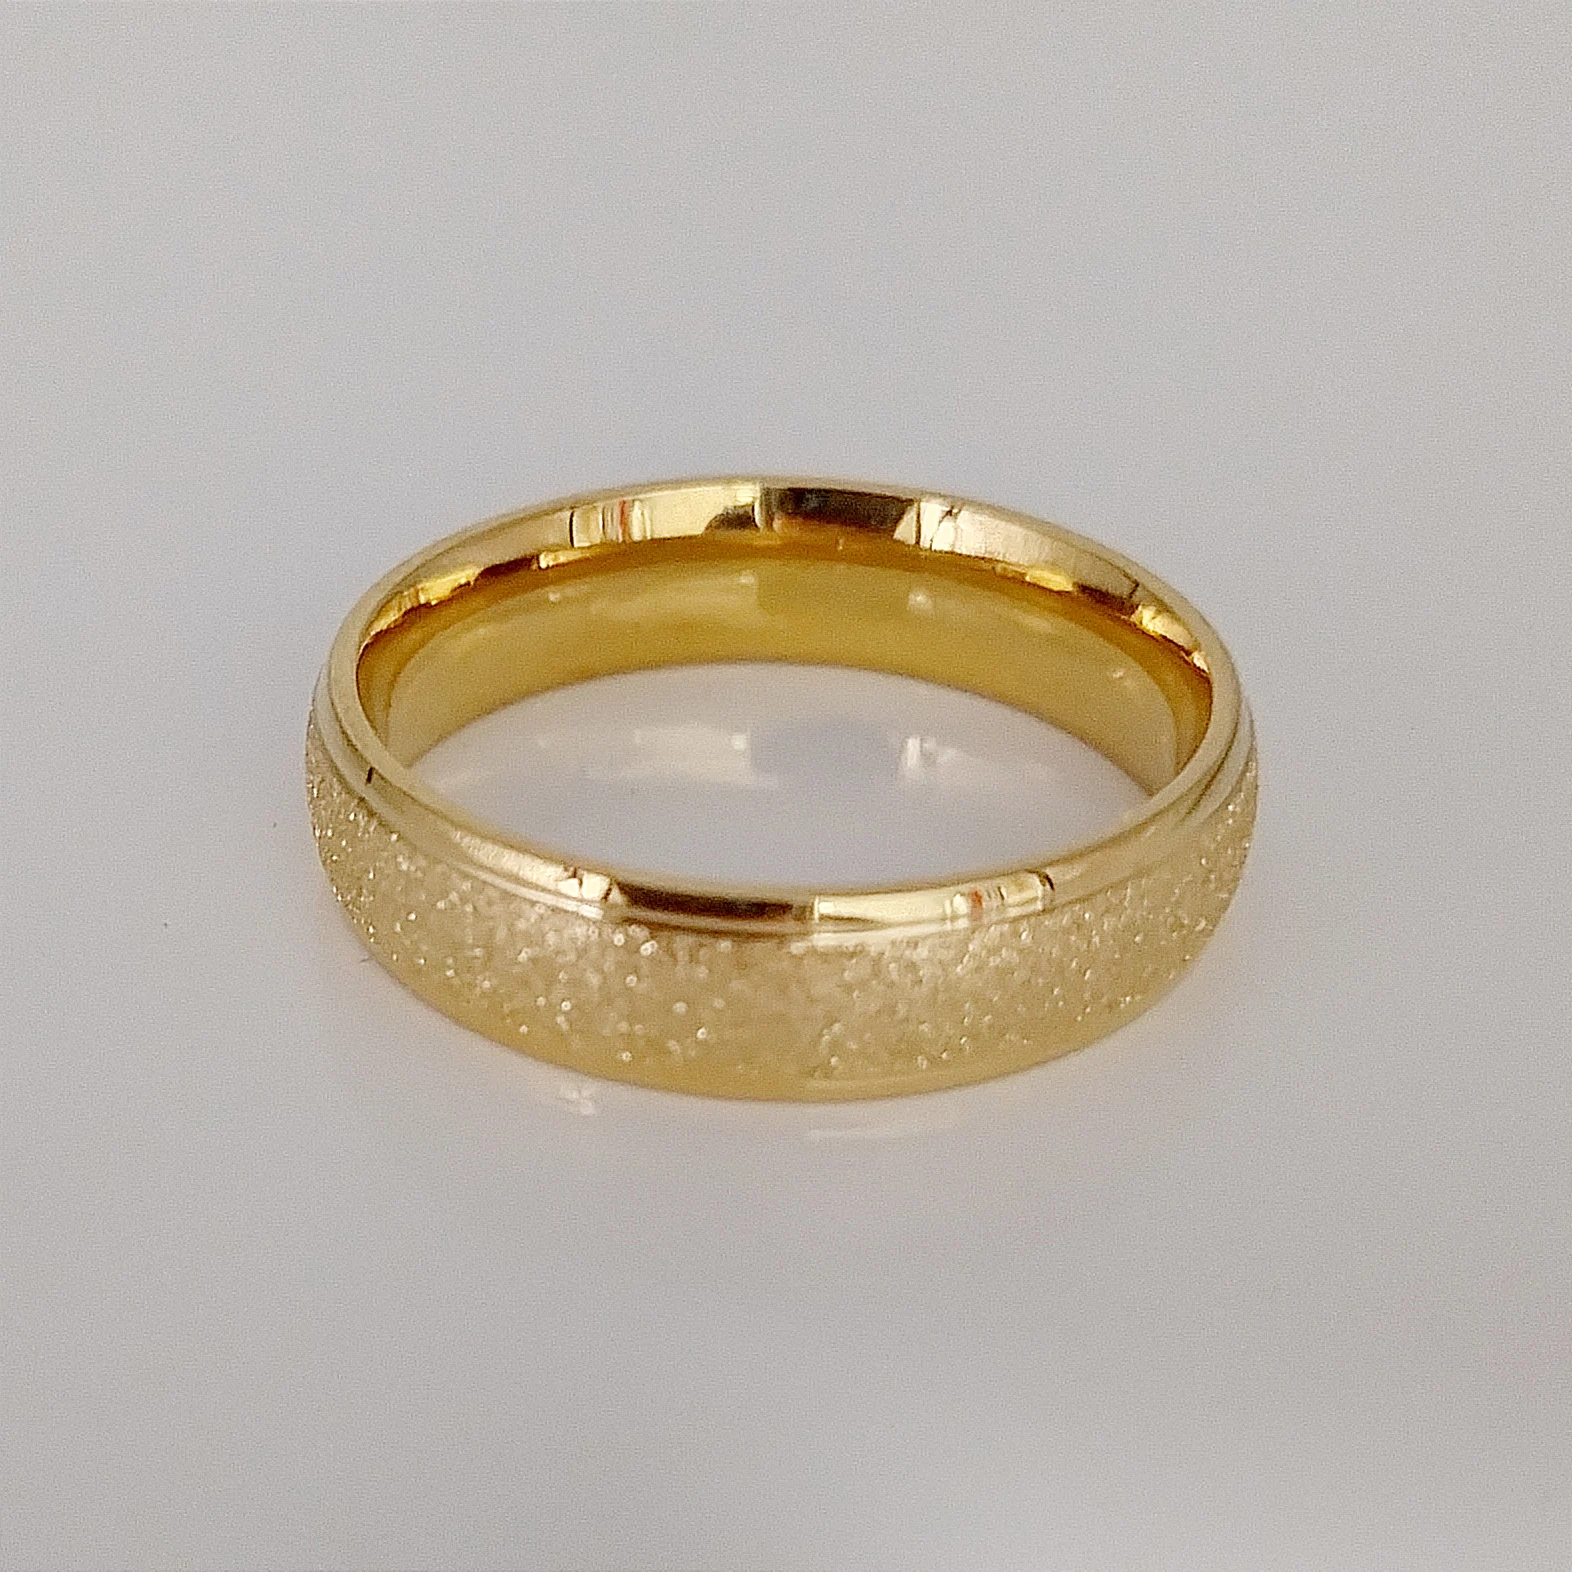 Wholesale Domed Love Wedding Rings For Men and Women Fashion Party costume 24 Gold Plated Stainless